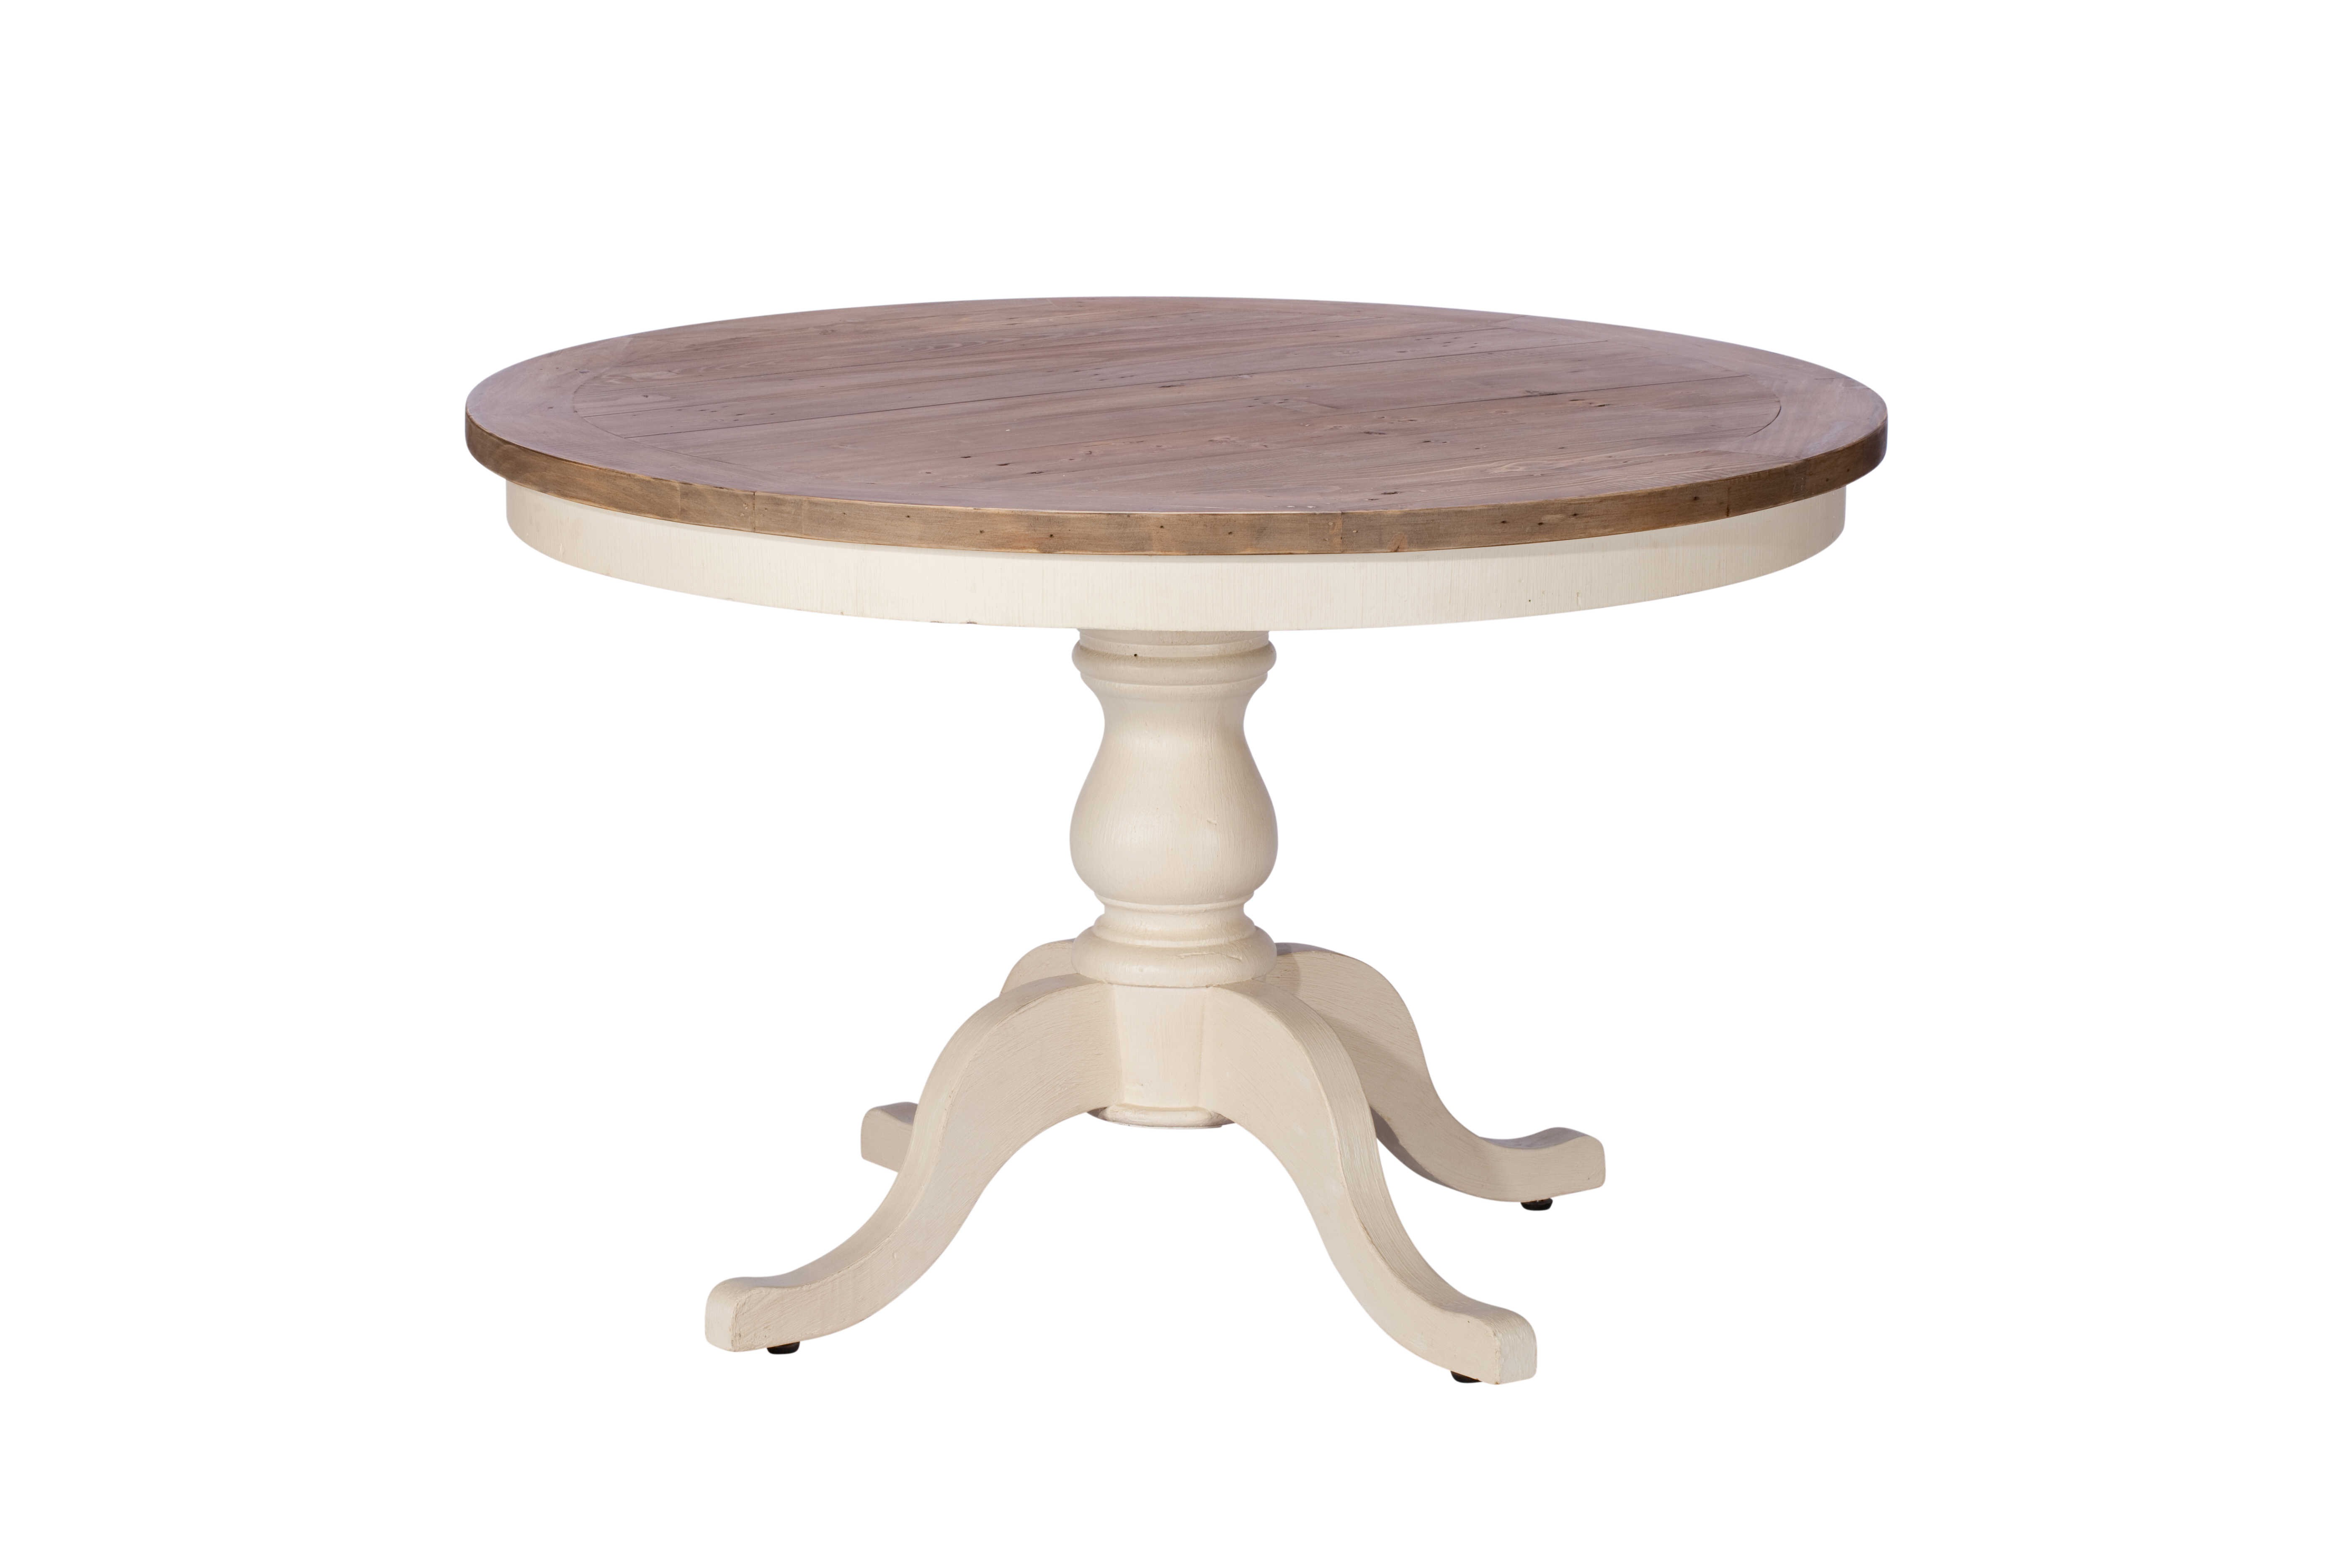 painted round dining table photo - 1